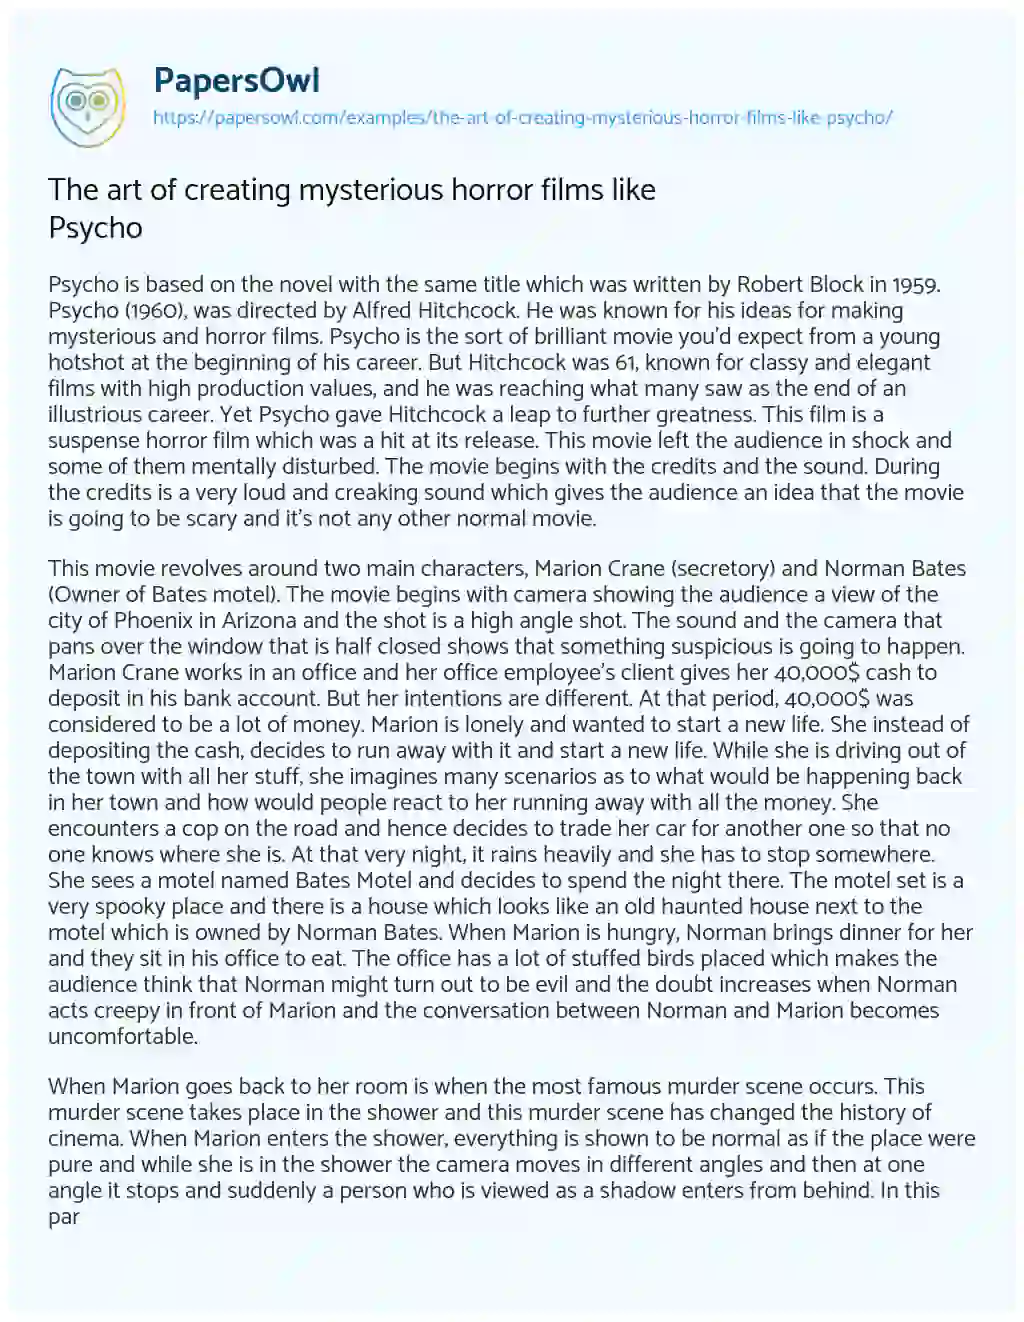 Essay on The Art of Creating Mysterious Horror Films Like Psycho